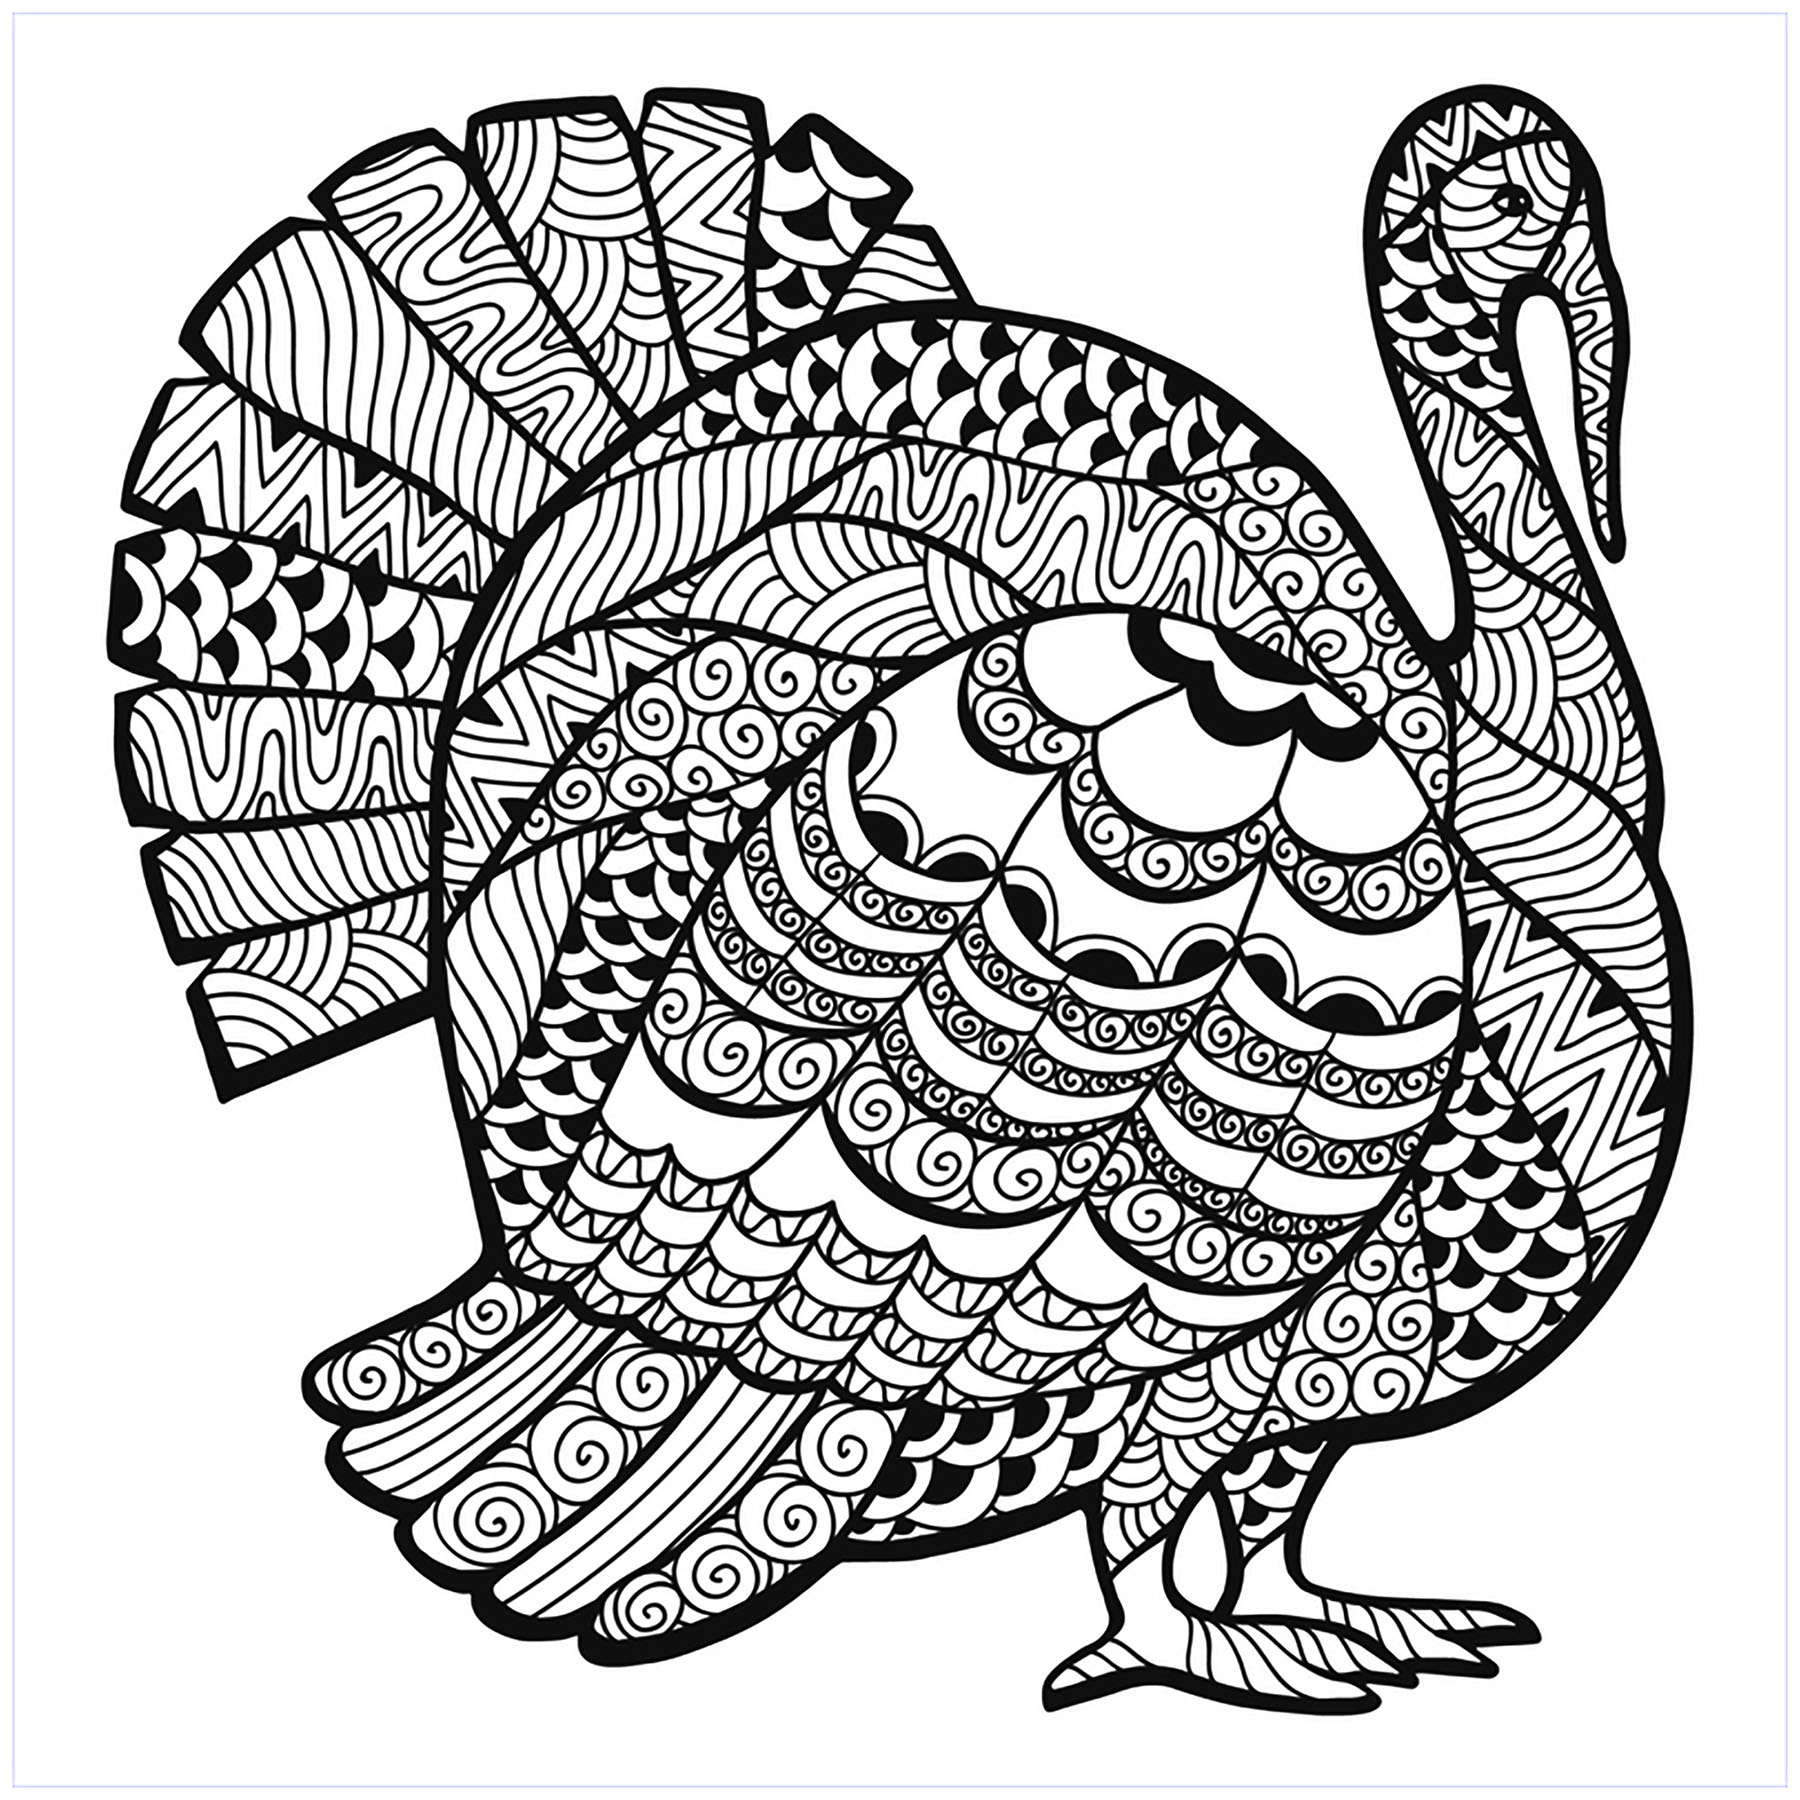 20-free-thanksgiving-coloring-pages-for-kids-and-adults-prudent-penny